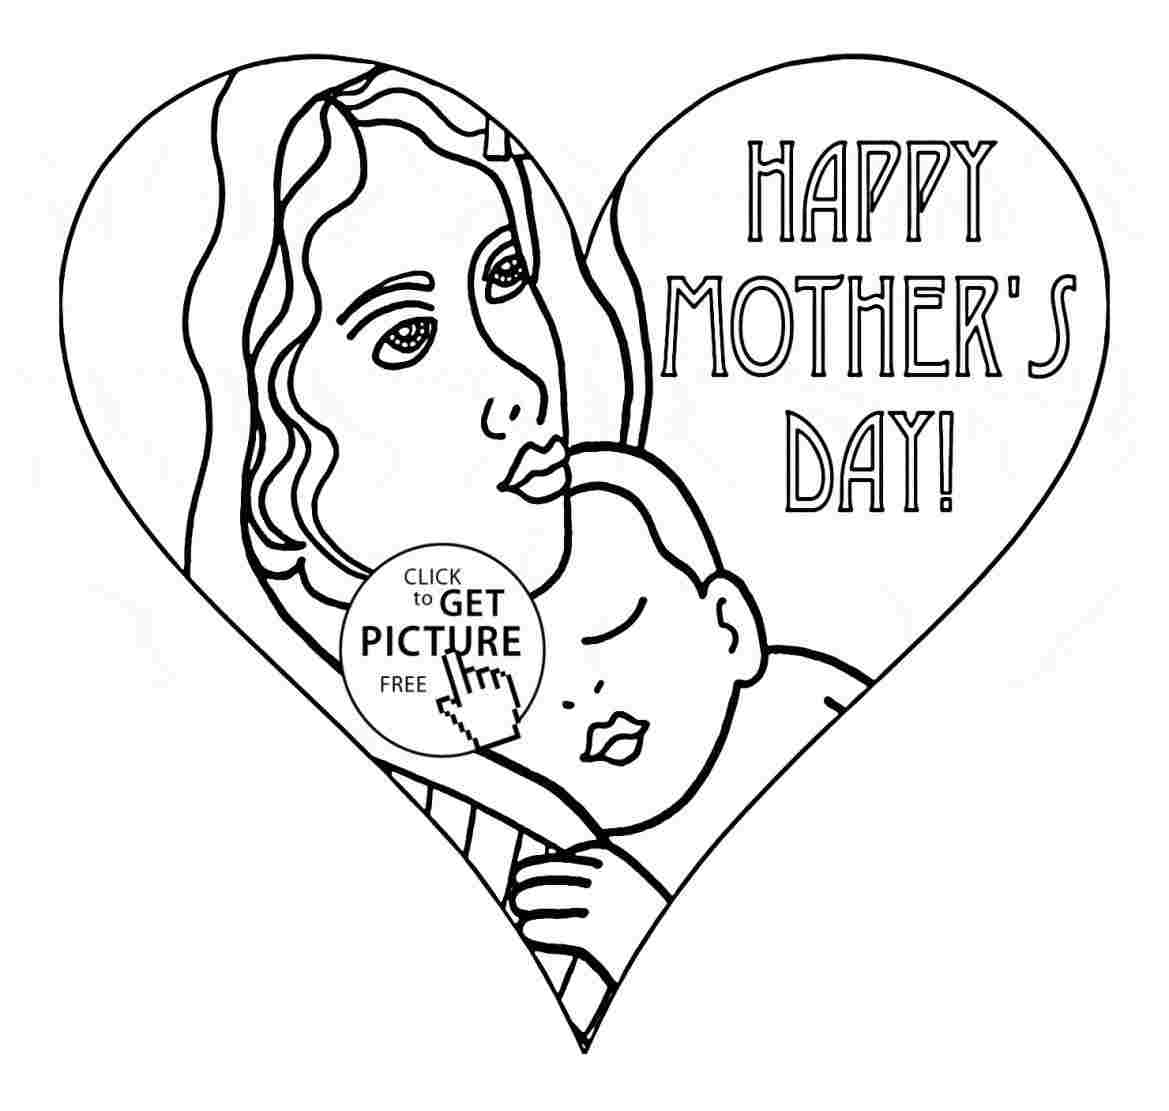 Happy Mothers Day Drawing Ideas - Happy Mothers Day Drawings. 